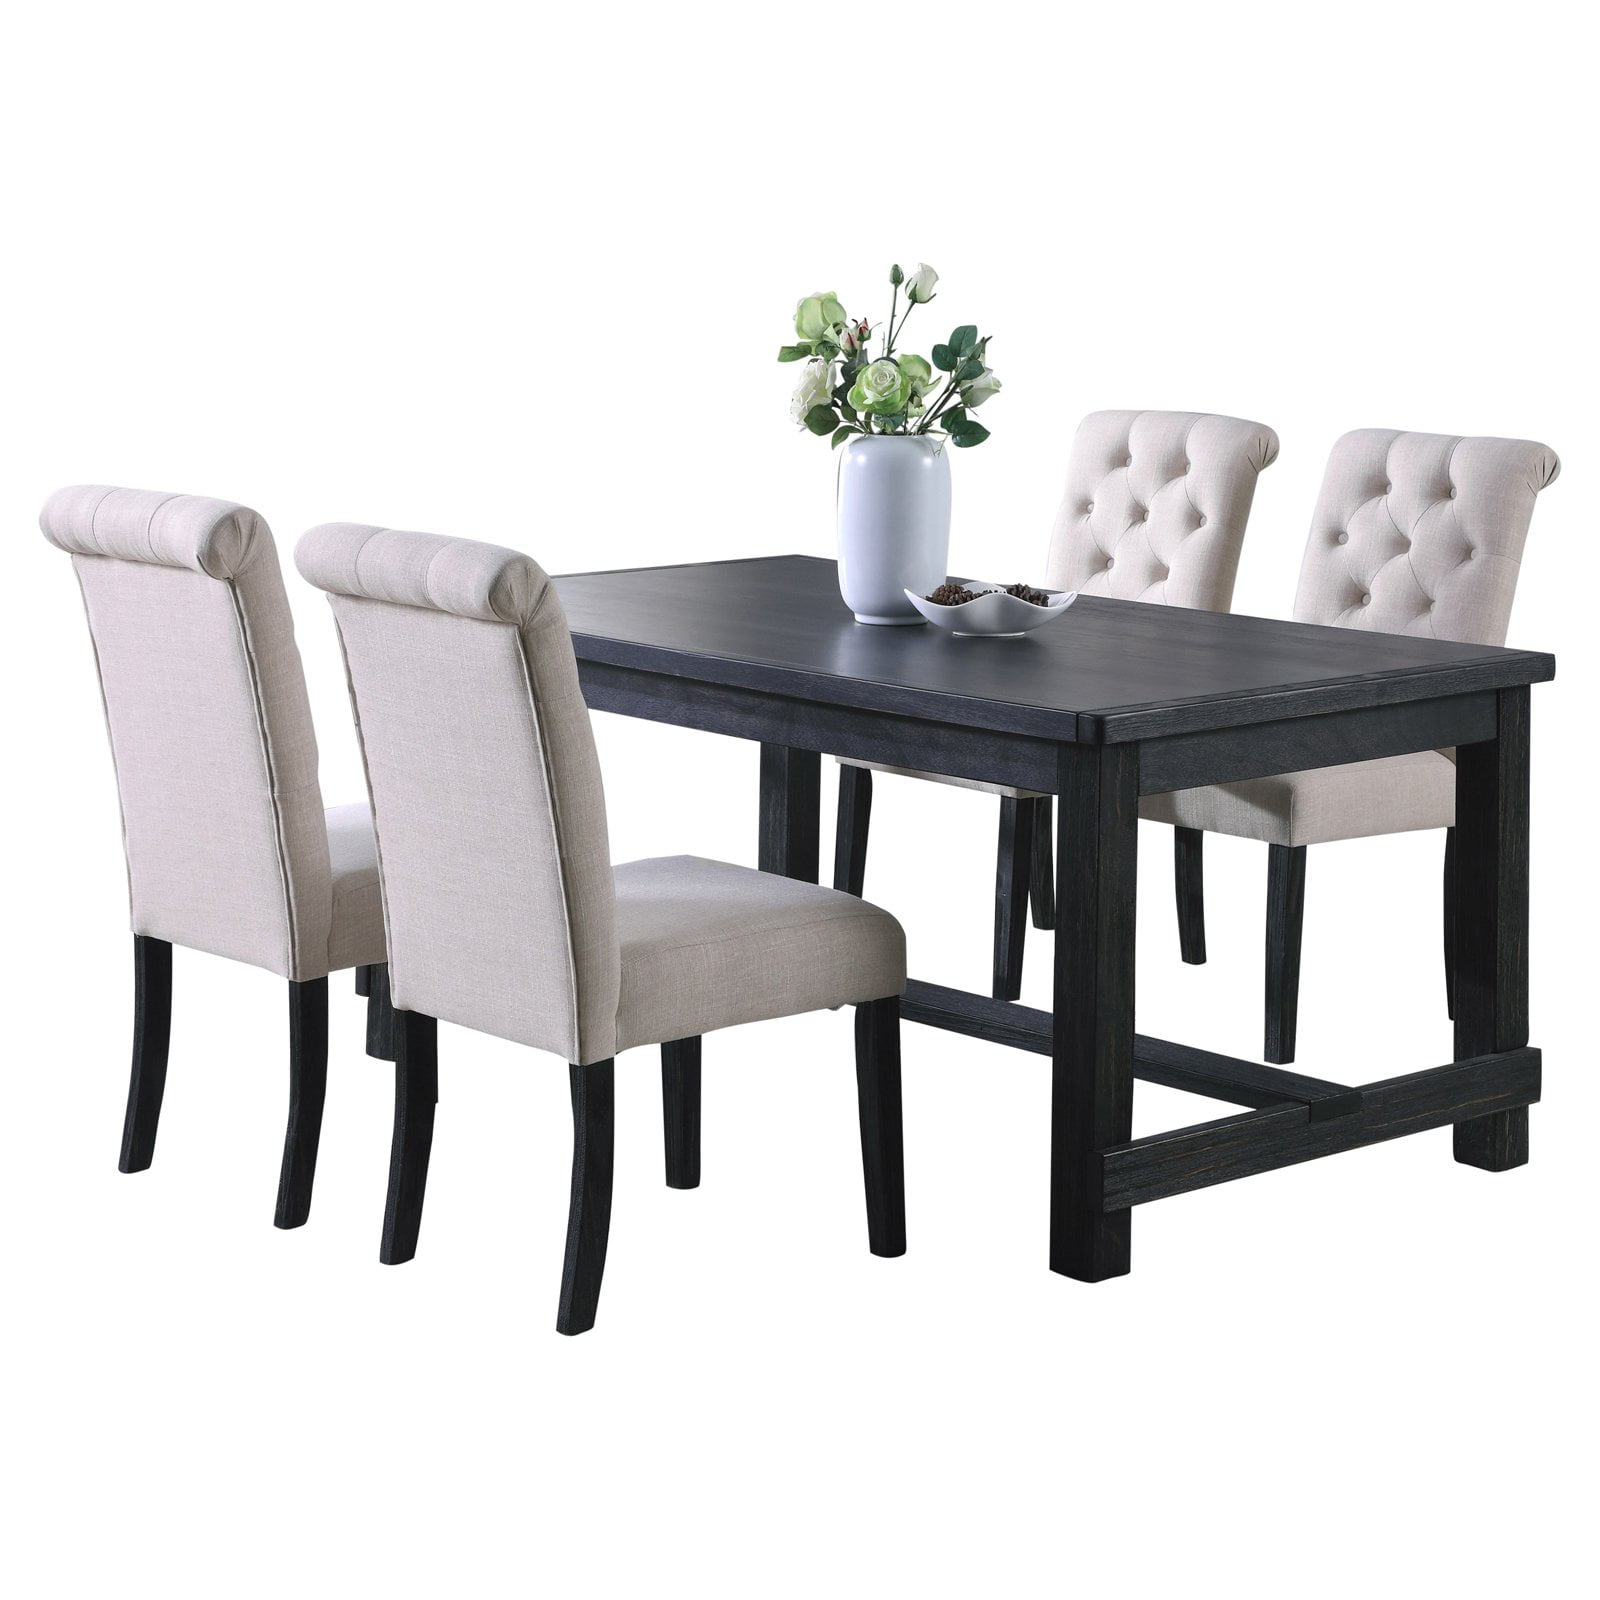 Leviton Antique Black Finished Wood, Antique White Distressed Dining Room Chairs